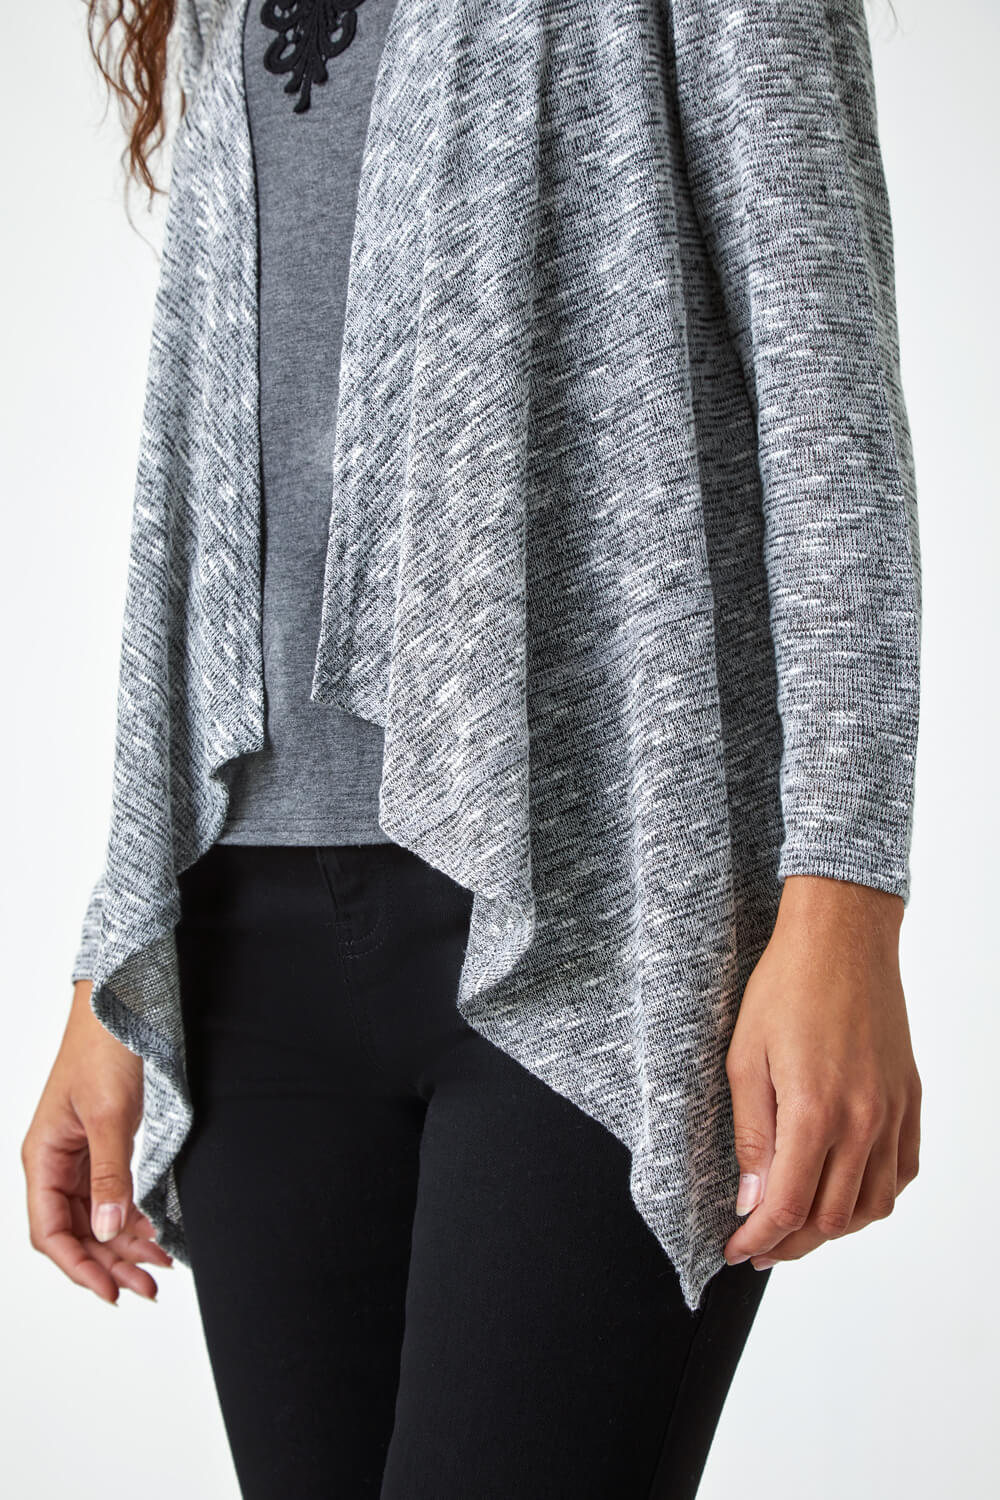 Grey Soft Knit Cardigan & Top, Image 5 of 5